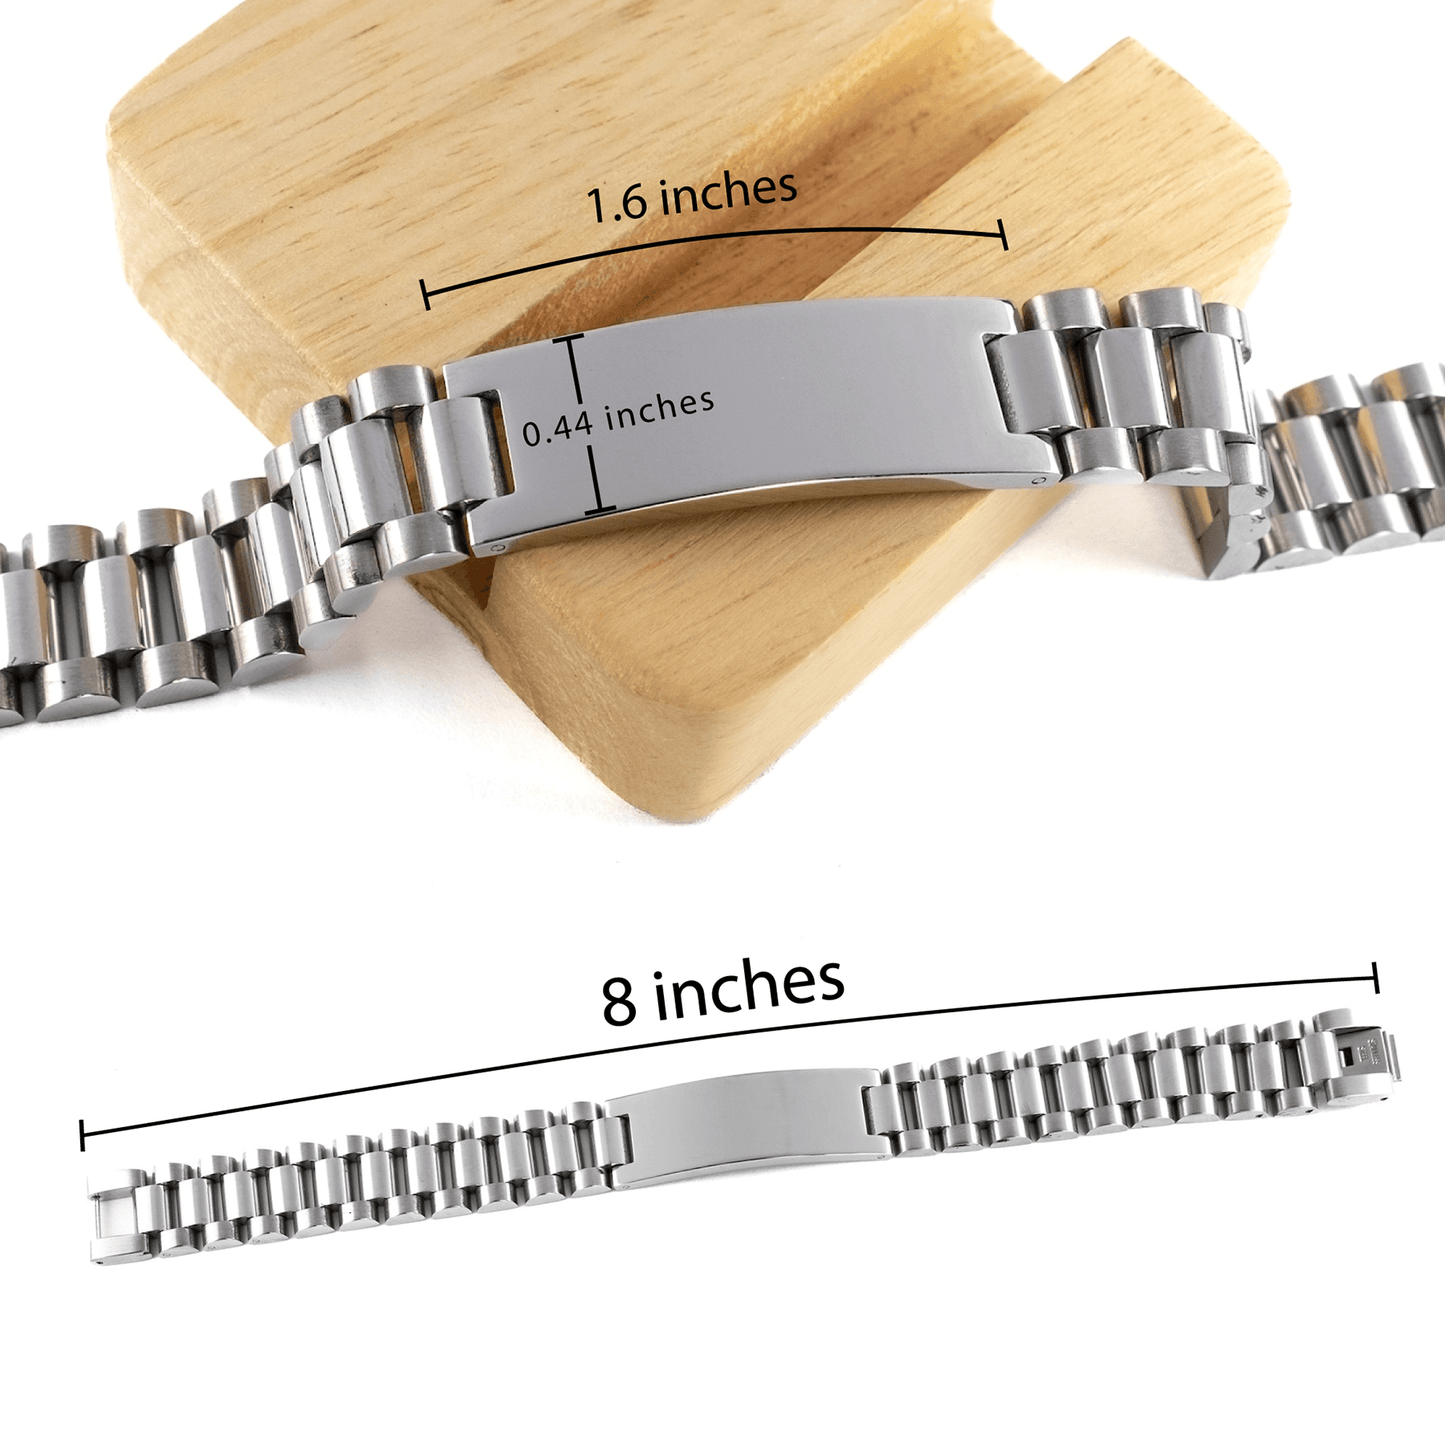 Sarcastic Anesthesiologist Ladder Stainless Steel Bracelet Gifts, Christmas Holiday Gifts for Anesthesiologist Birthday, Anesthesiologist: Because greatness is woven into the fabric of every day, Coworkers, Friends - Mallard Moon Gift Shop